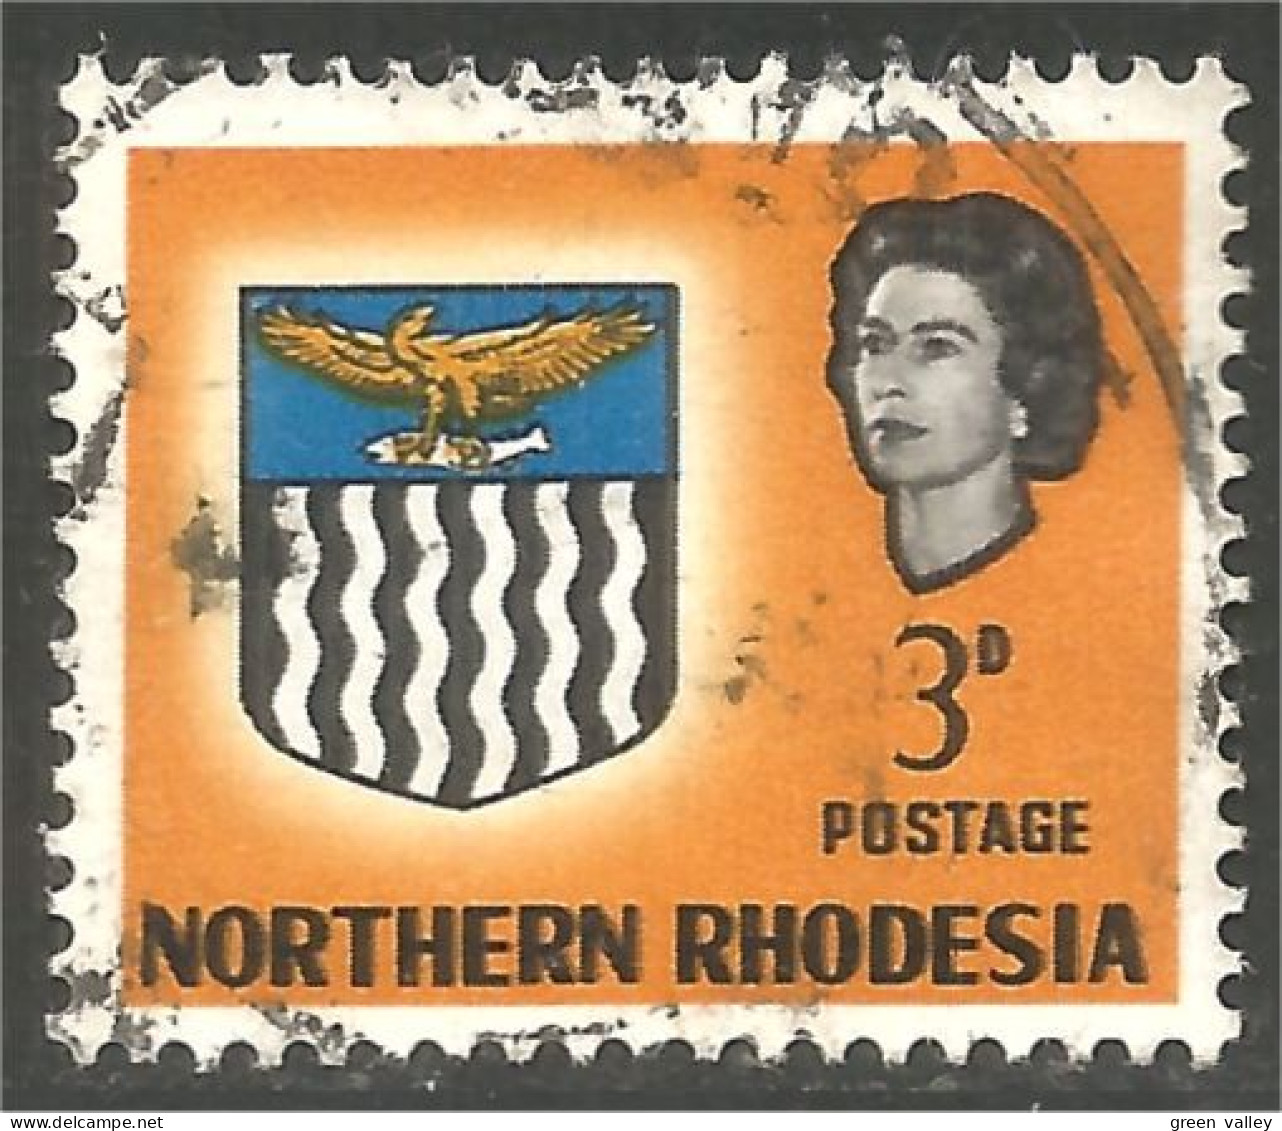 758 Northern Rhodesia Armoiries Coat Of Arms Aigle Eagle Adler Aquila (RHN-14d) - Stamps